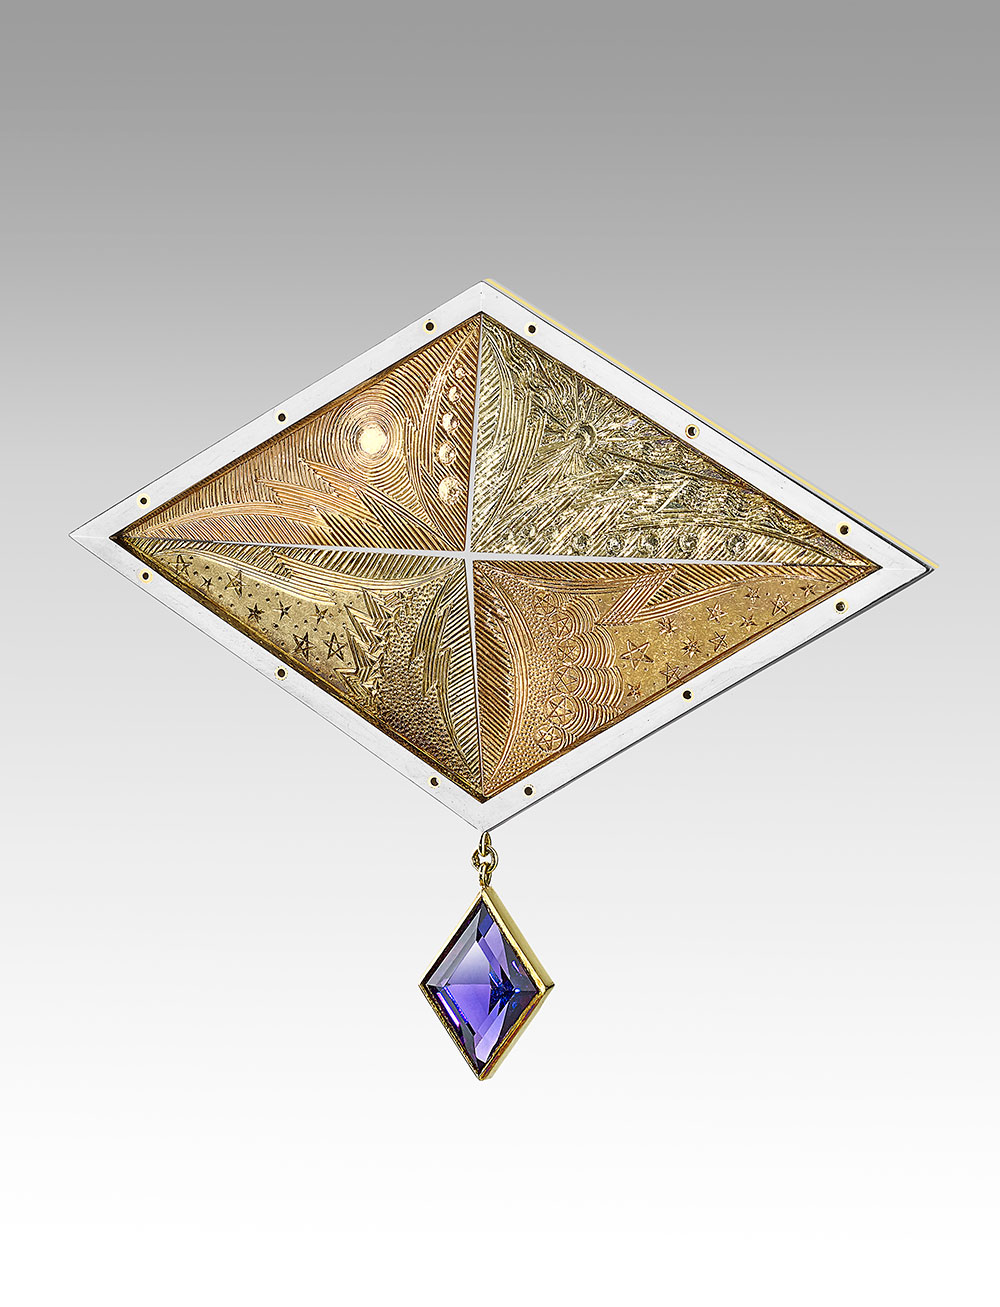 <a href="/node/268">“STAR OF WONDER” Produced 1991 !8ct white / green / red /  yellow golds / Hand Engraved / Lozenge cut Amethyst  photo : Simon B Armitt 2017</a>